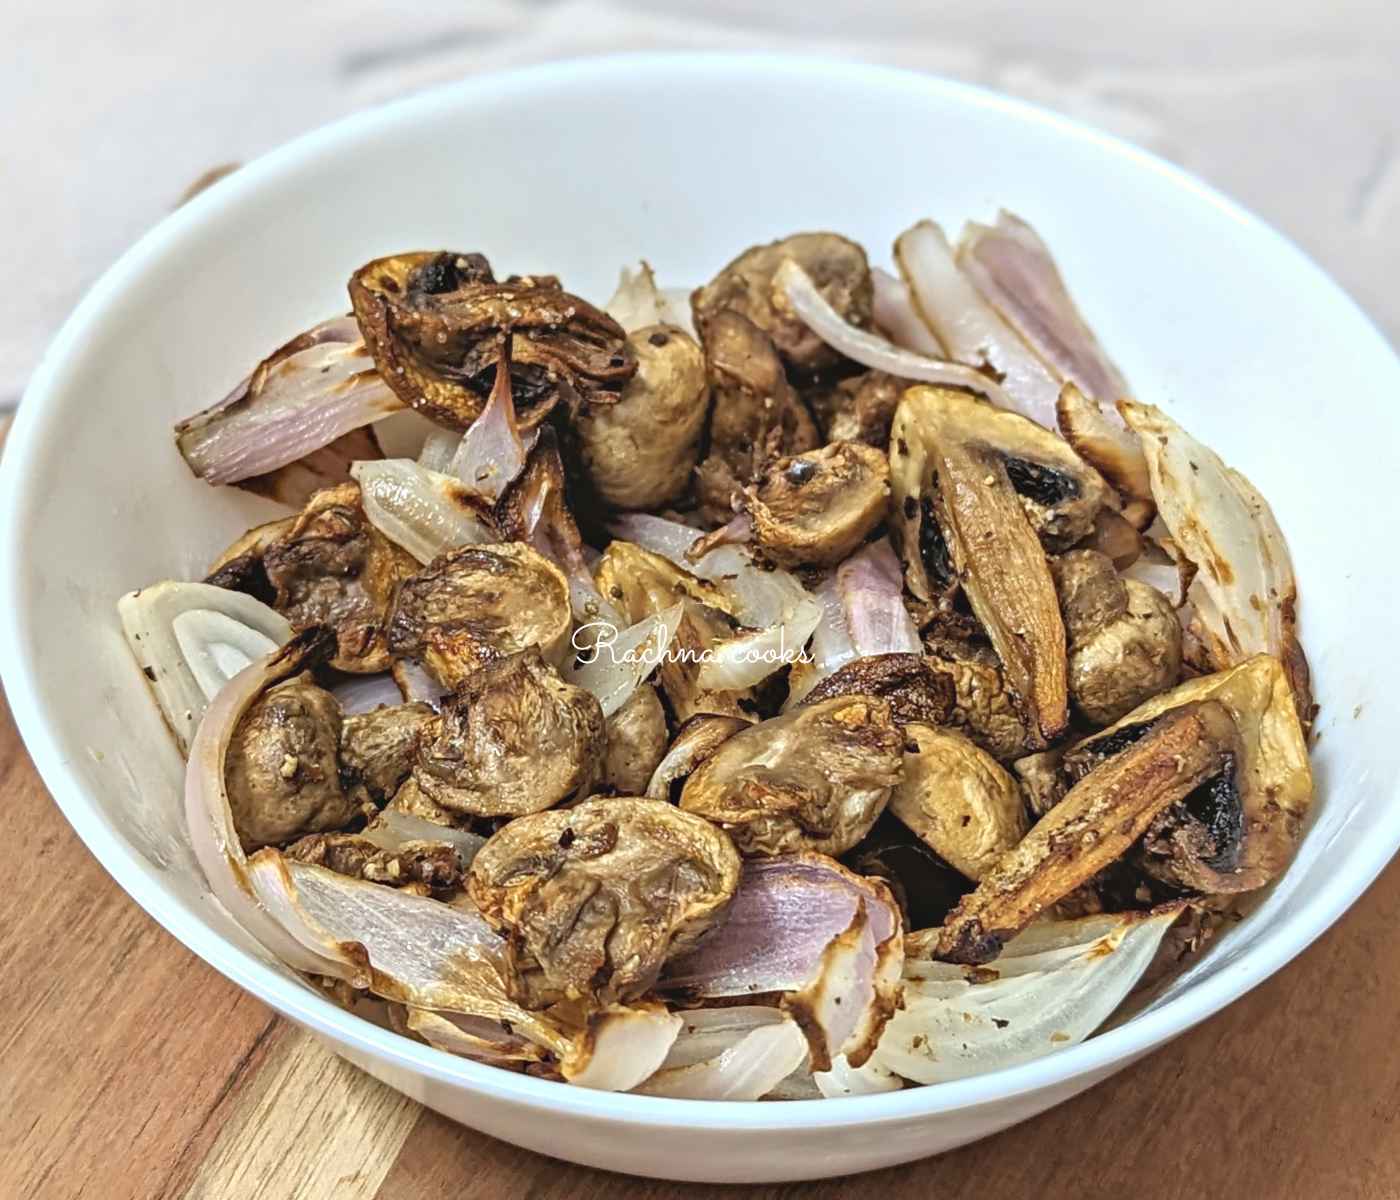 Air fryer mushroom and onion in a white bowl.